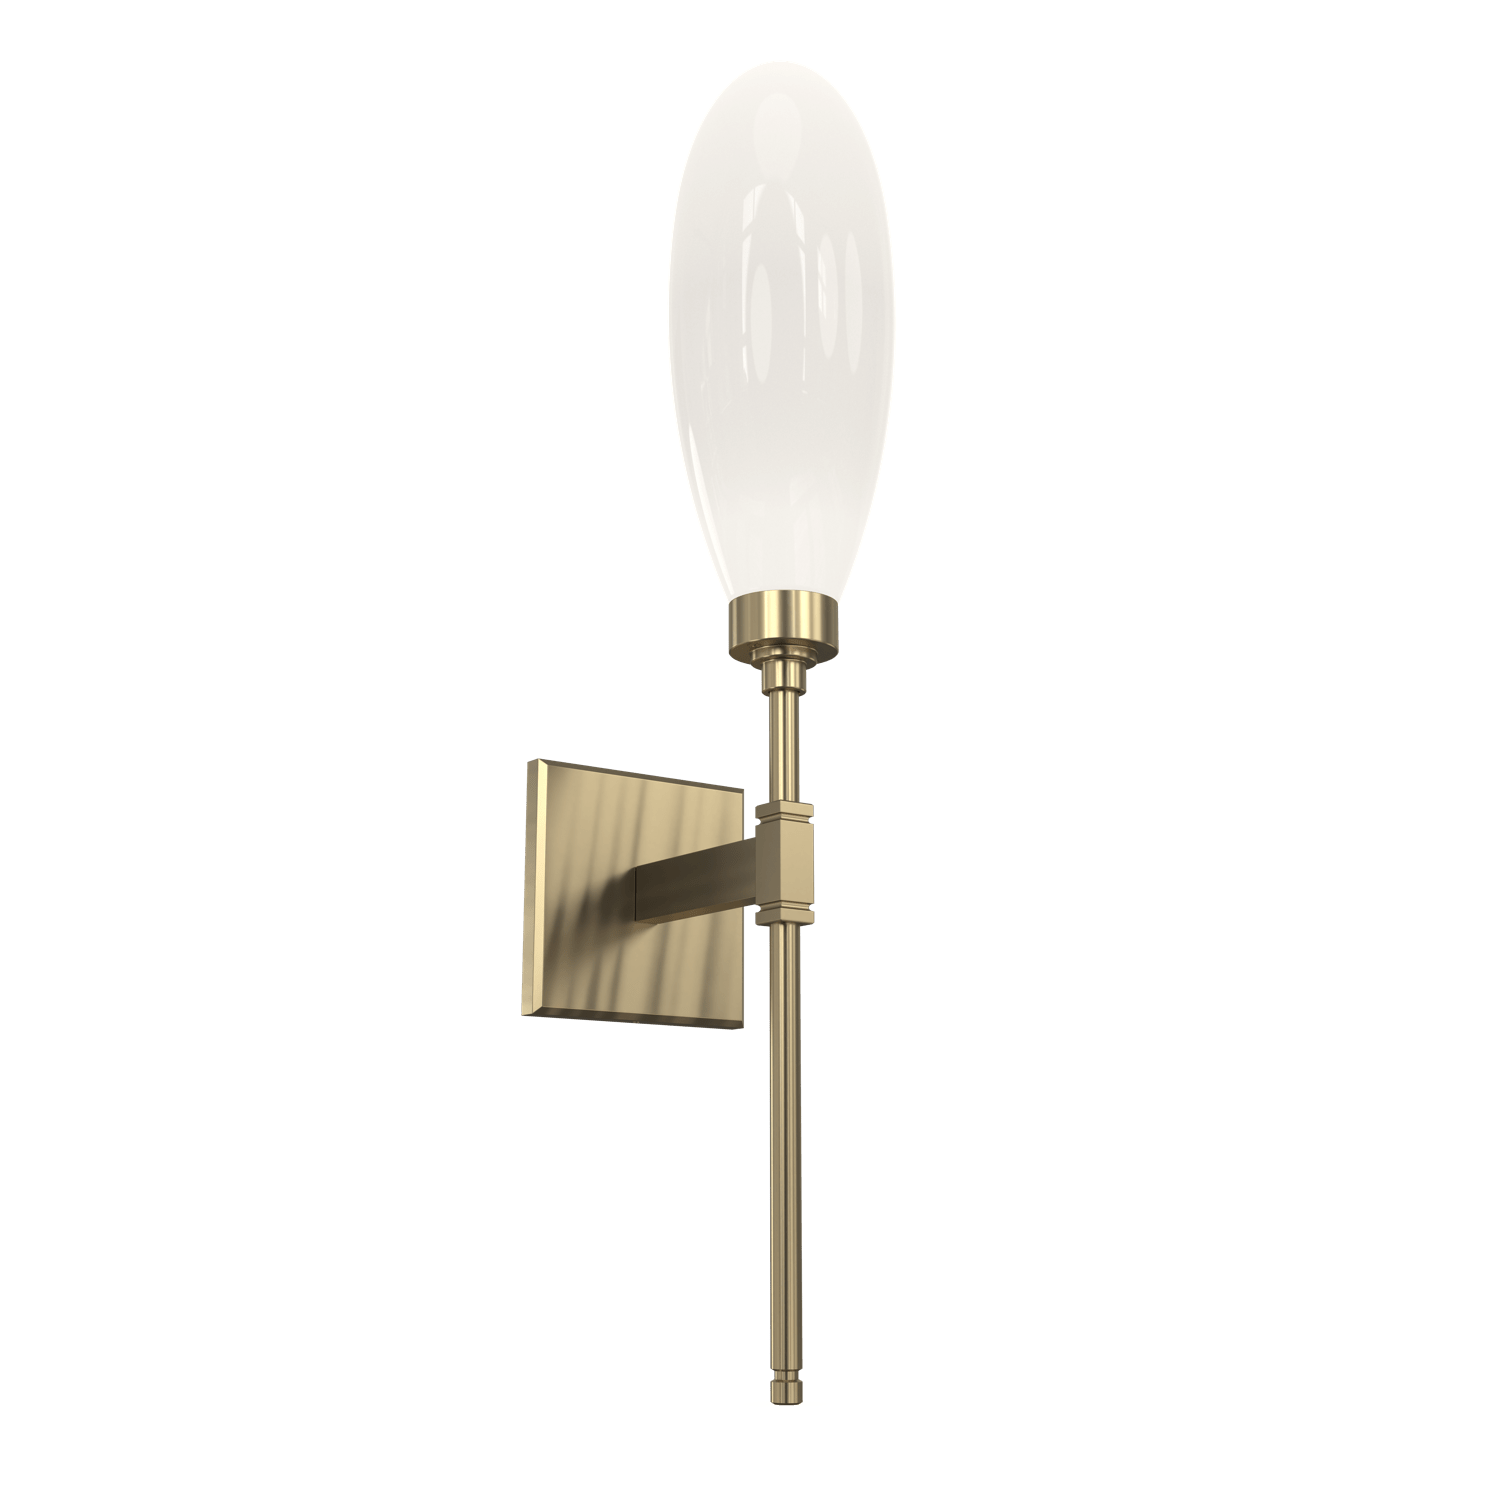 IDB0071-21-HB-WL-LL-Hammerton-Studio-Fiori-wall-sconce-with-heritage-brass-finish-and-opal-white-glass-shades-and-LED-lamping